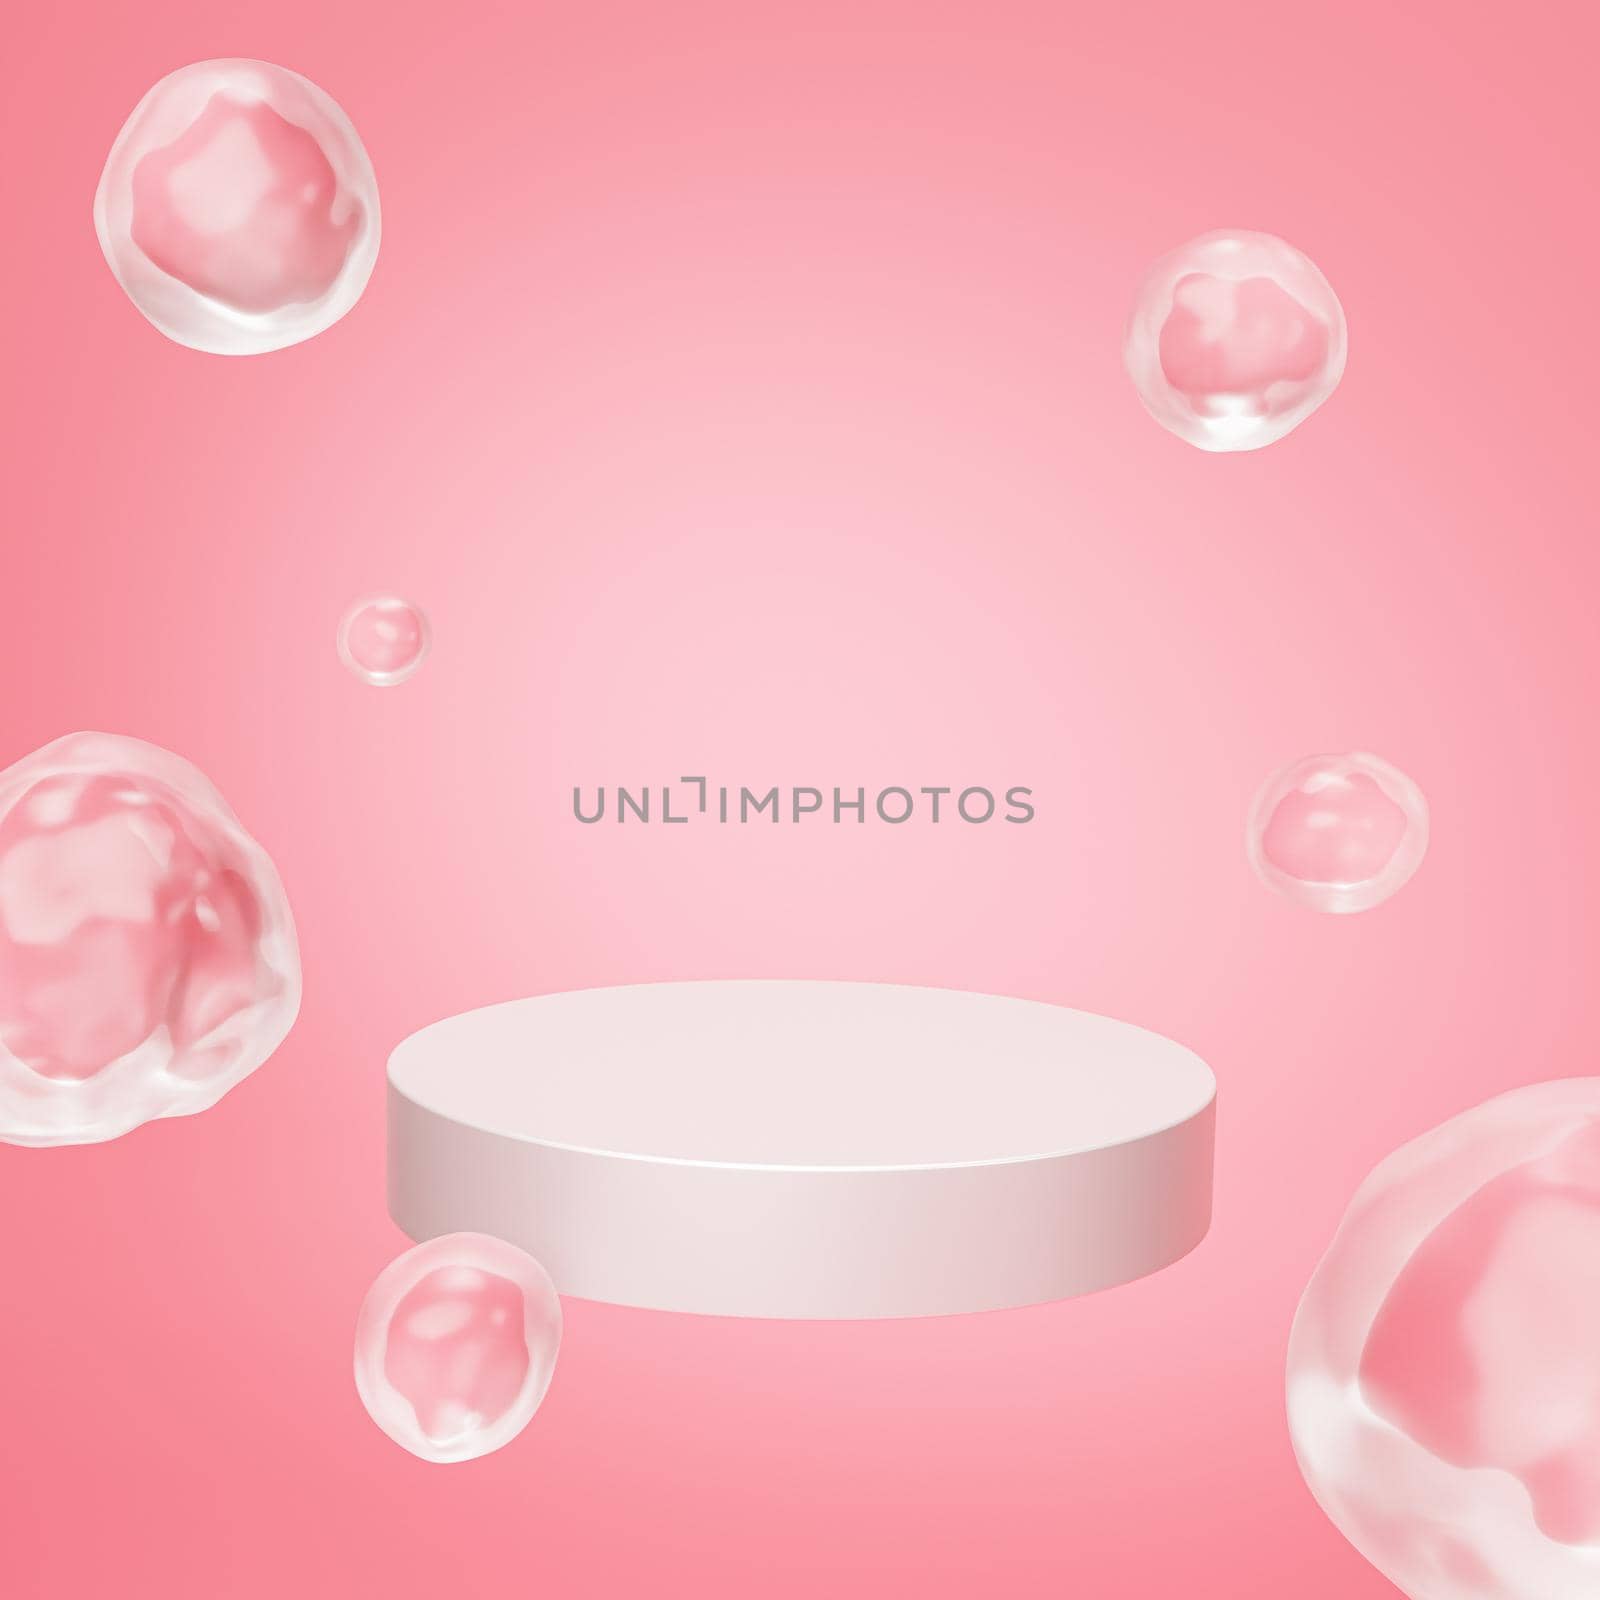 Beige podium or pedestal for products or advertising with bubbles on pastel pink background, 3d render by Frostroomhead